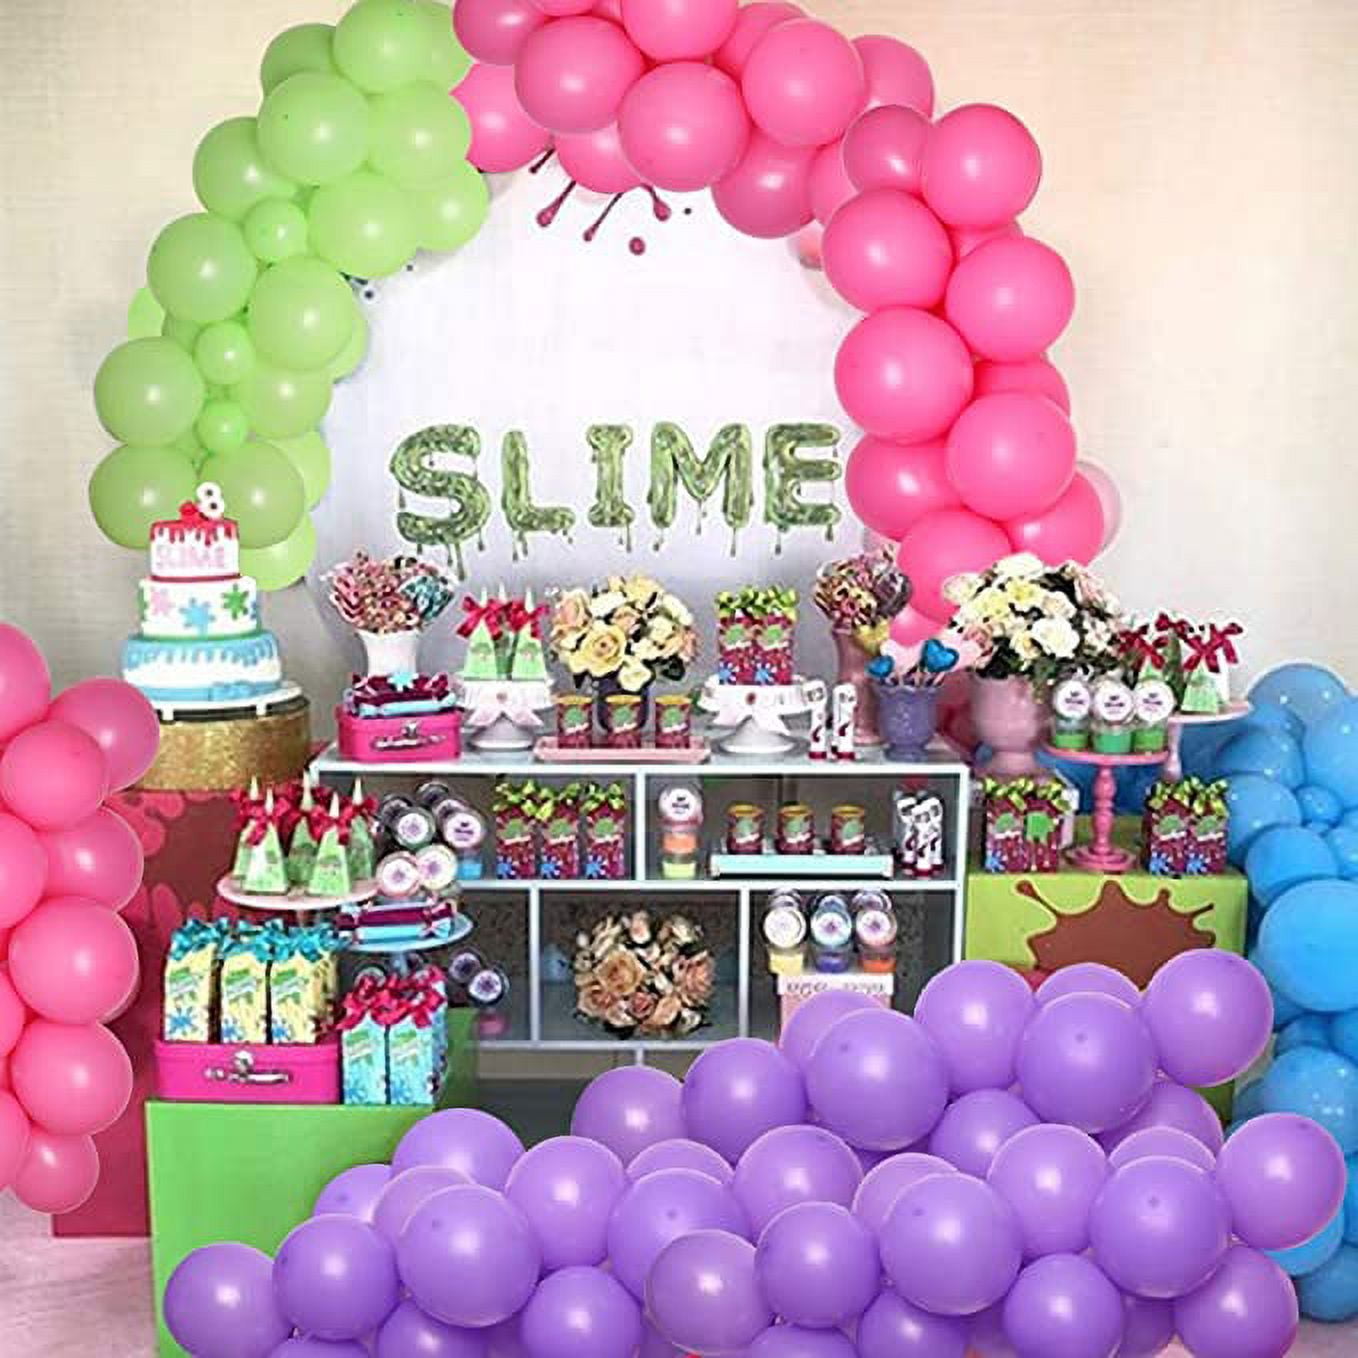 Slime Birthday Balloons Decoration Supplies Party Paint splatter 